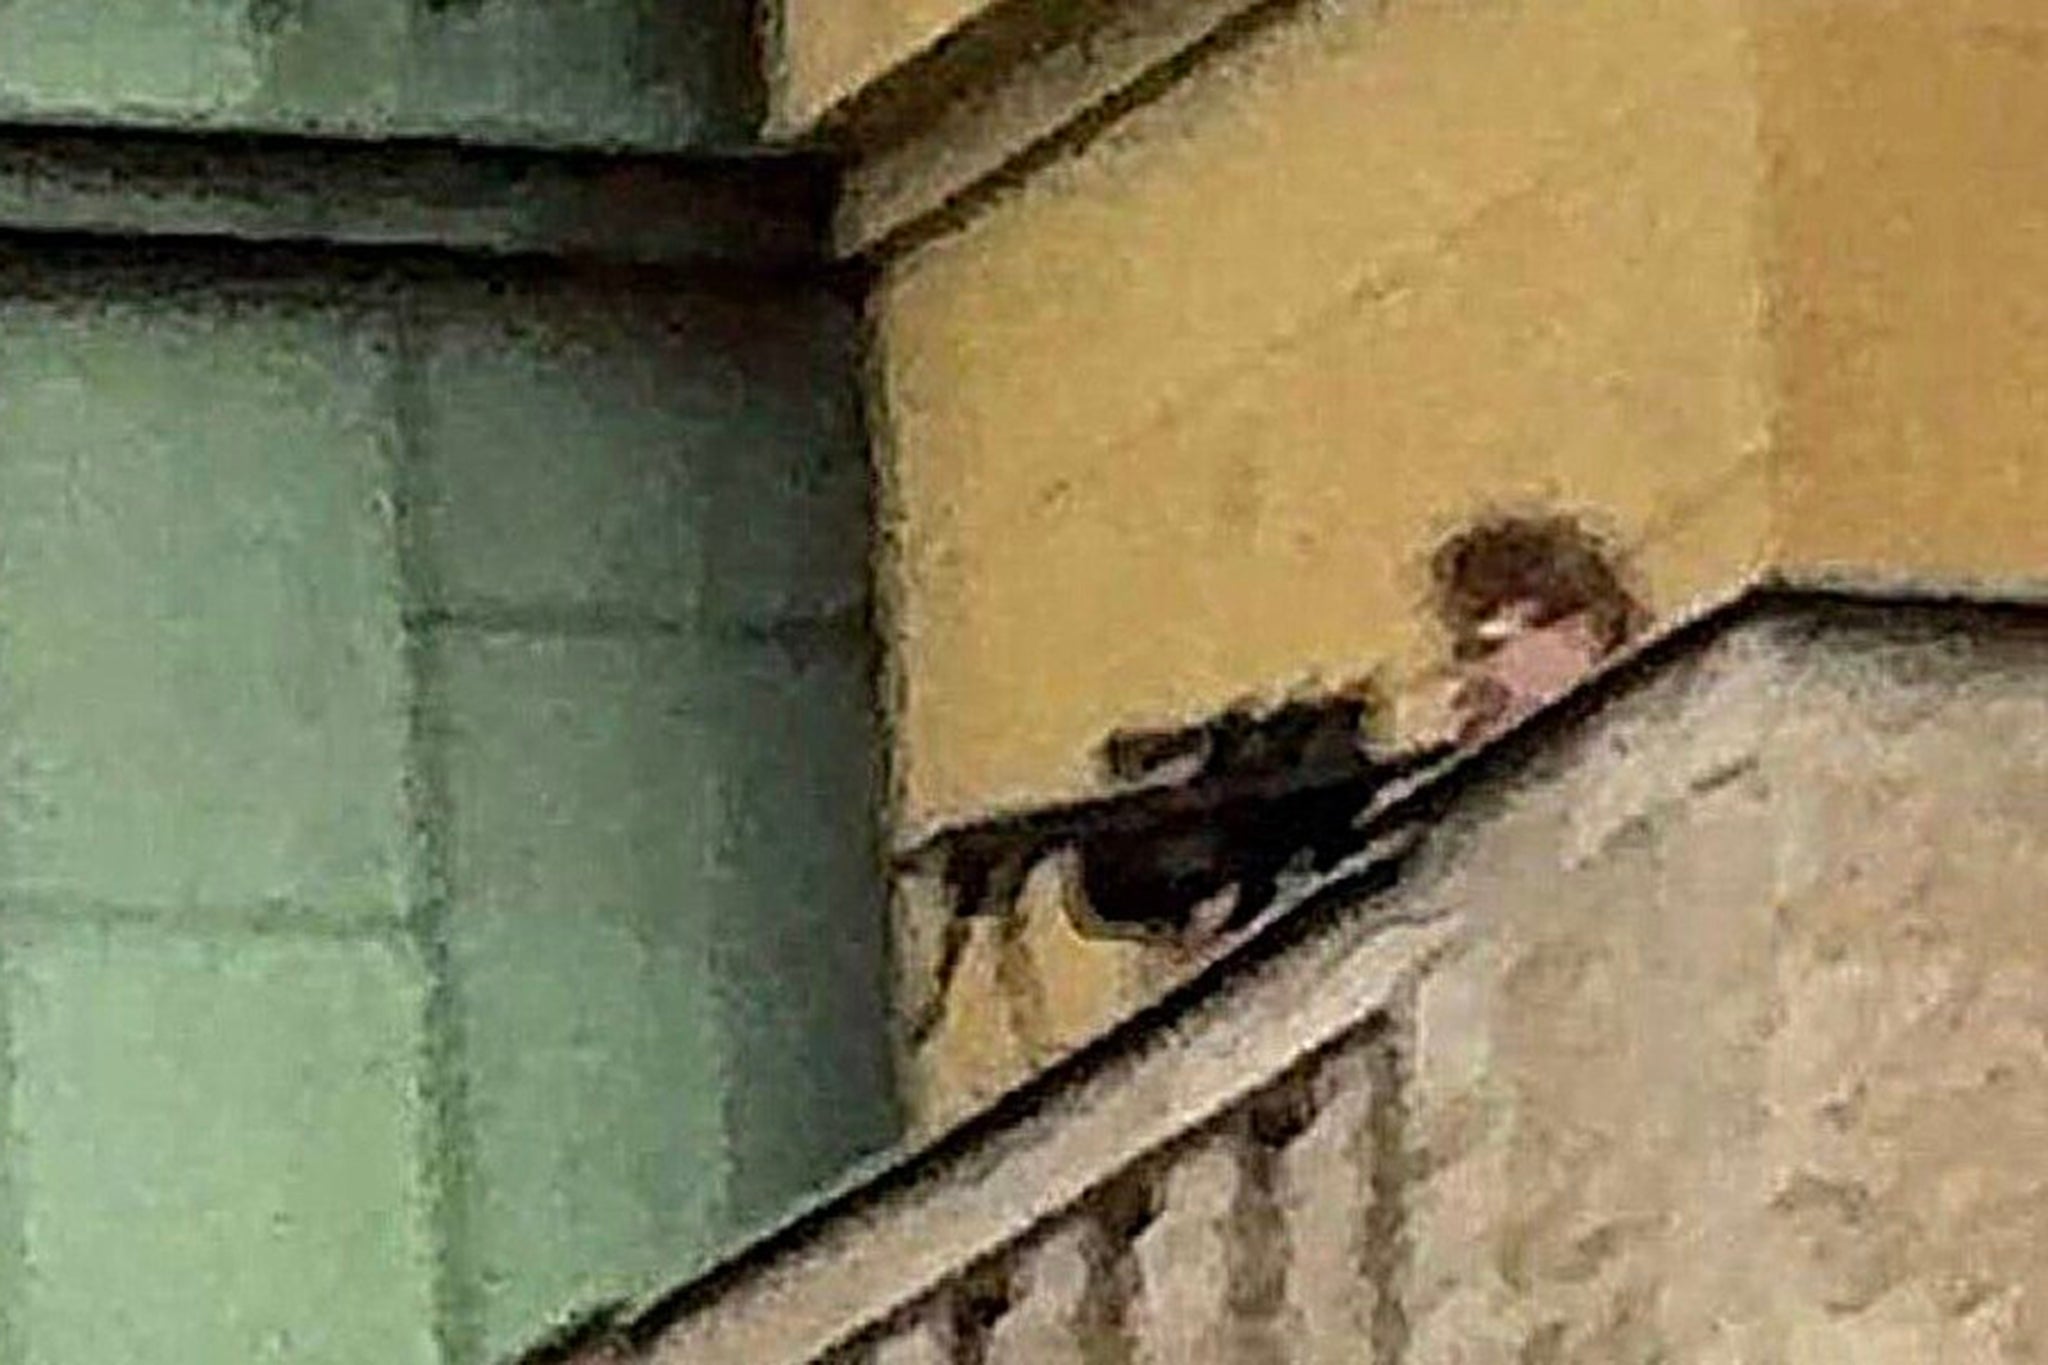 Kozak pointing a rifle at the square below